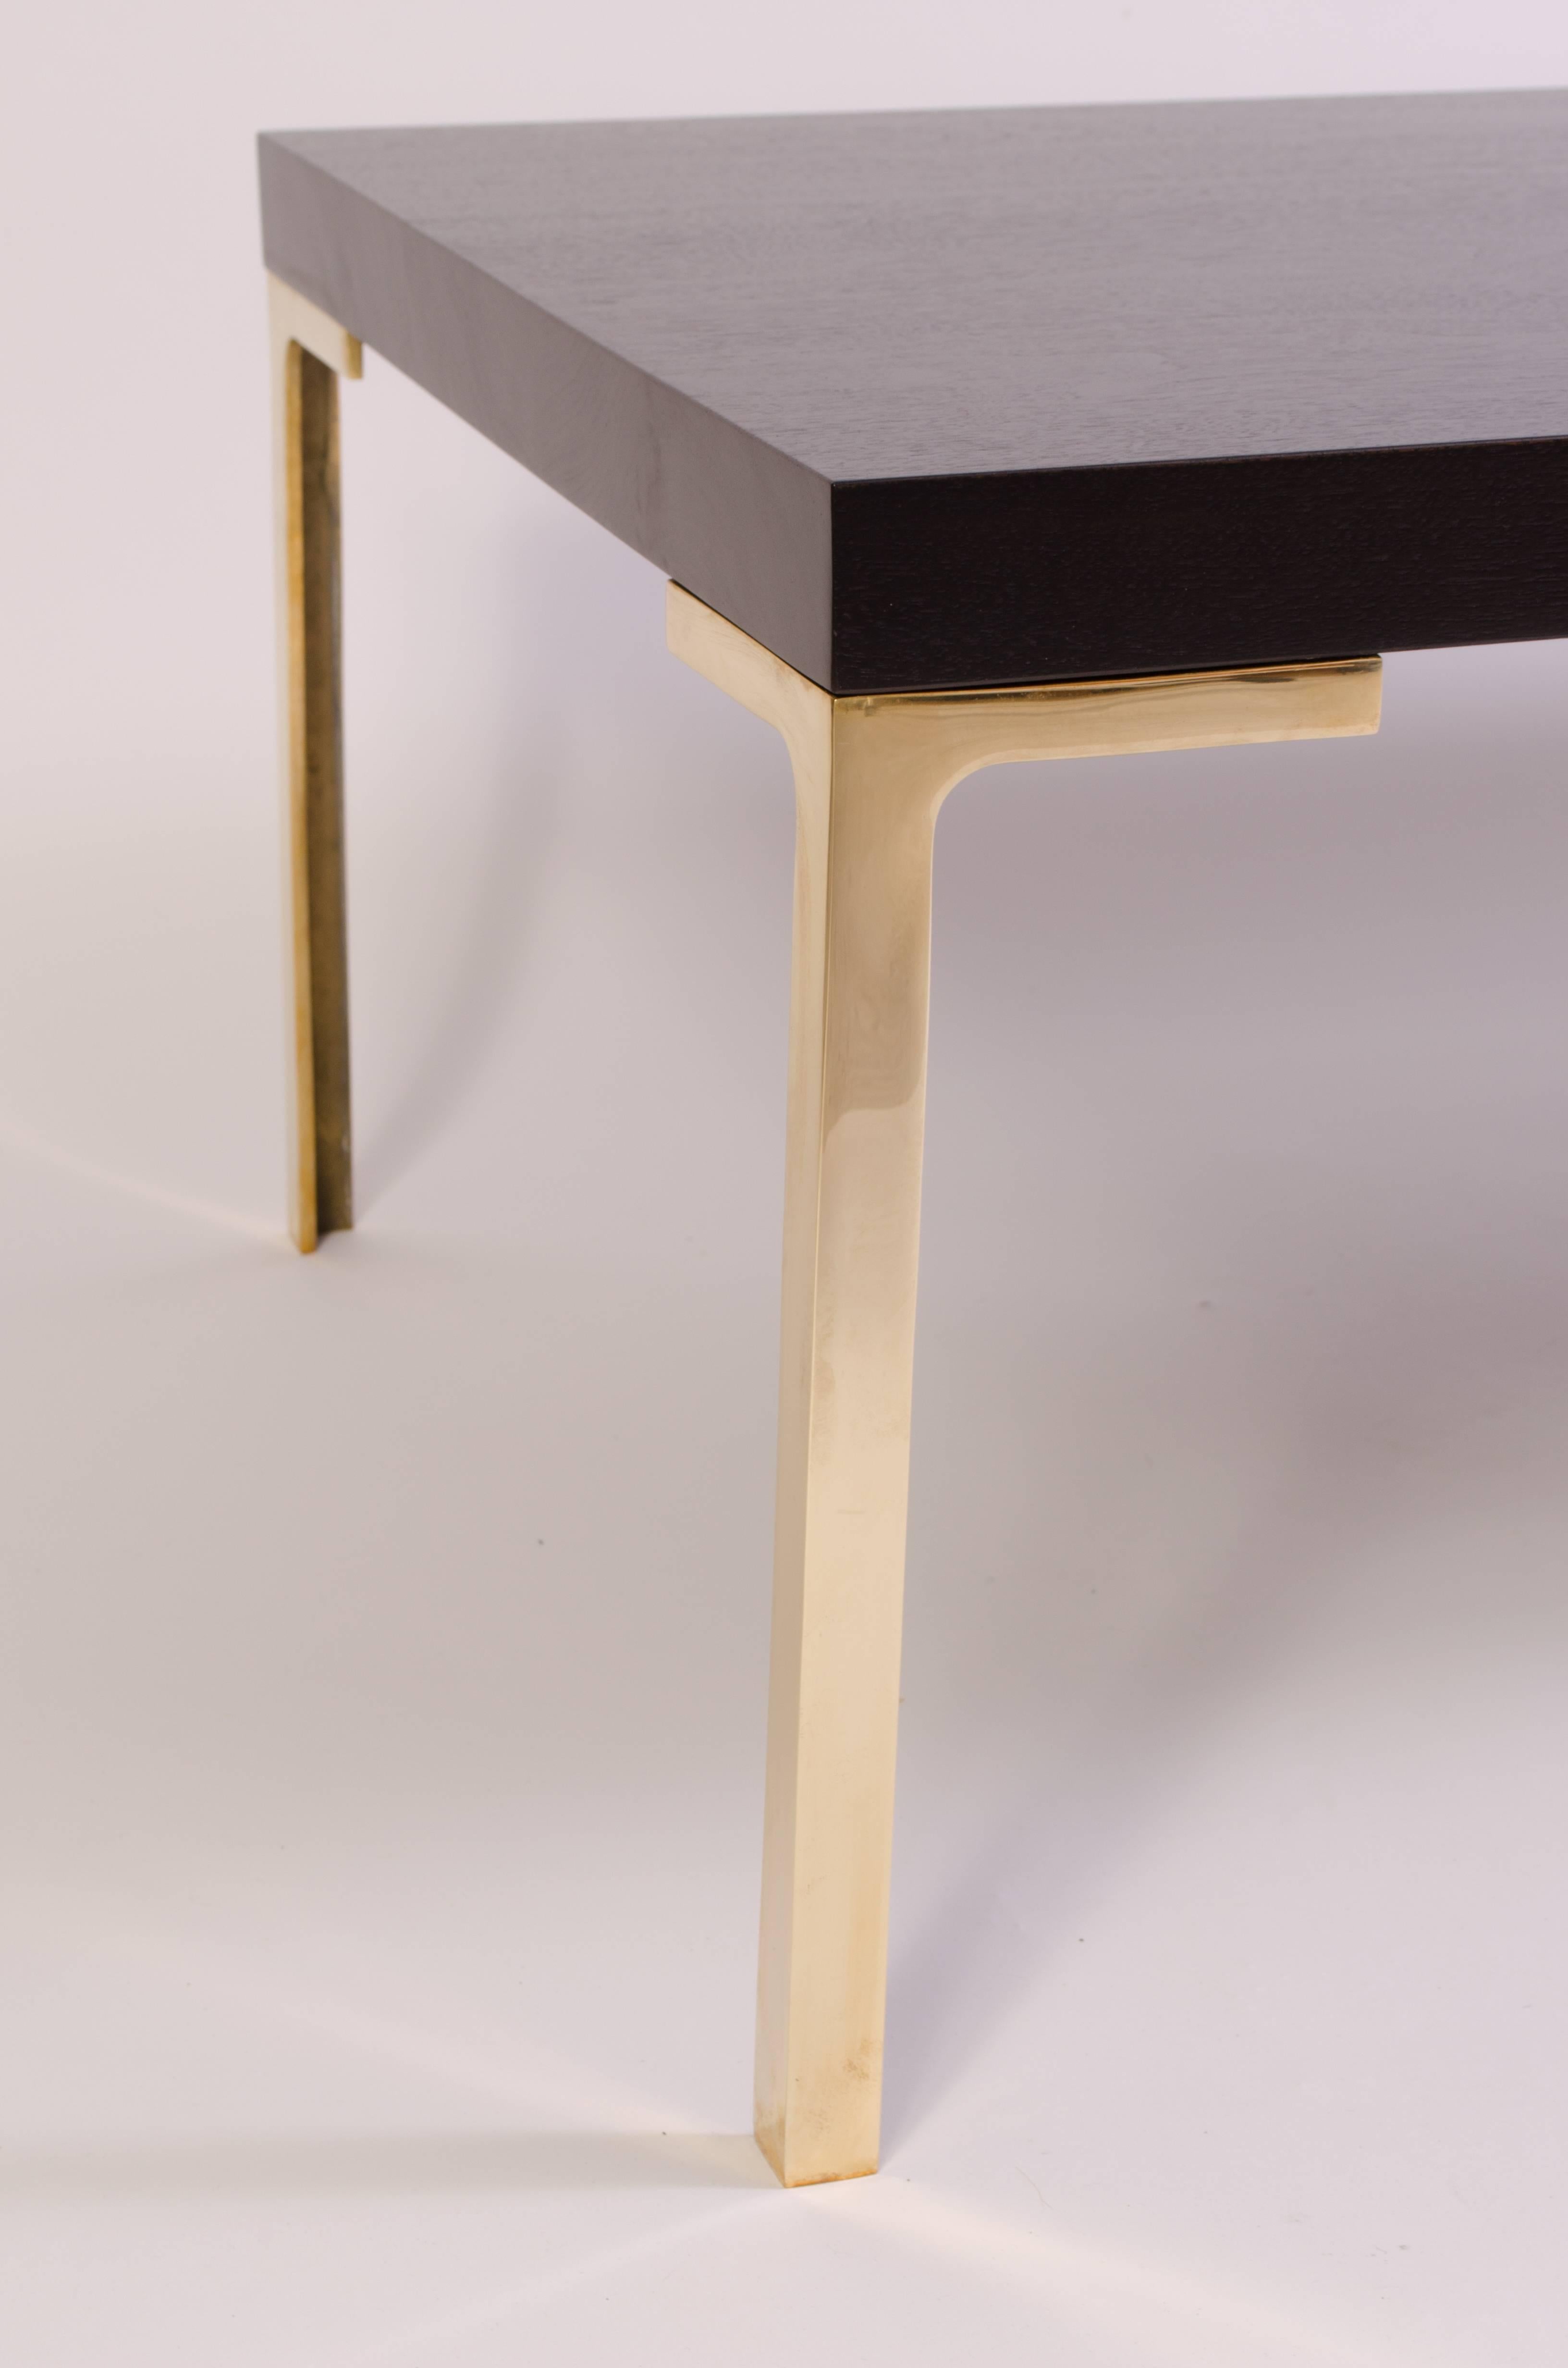 Modern Astor Cocktail Table in Ebonized Walnut with Brass Legs by Montage, 60